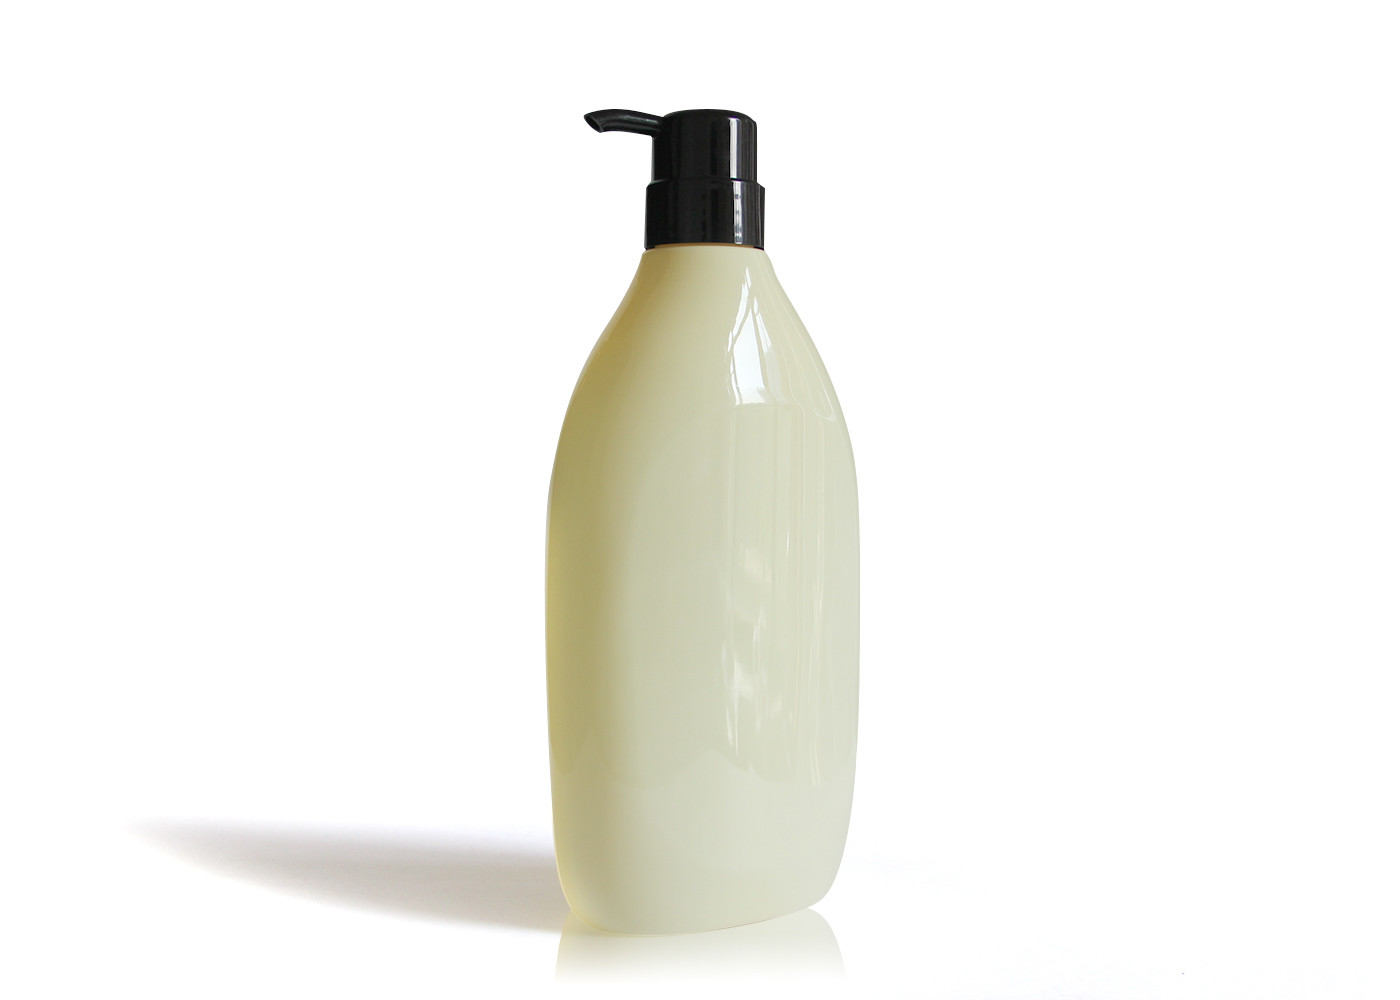  Washable Cosmetic Pump Bottle / Light Yellow Baby Shampoo Bottle 780ml Manufactures